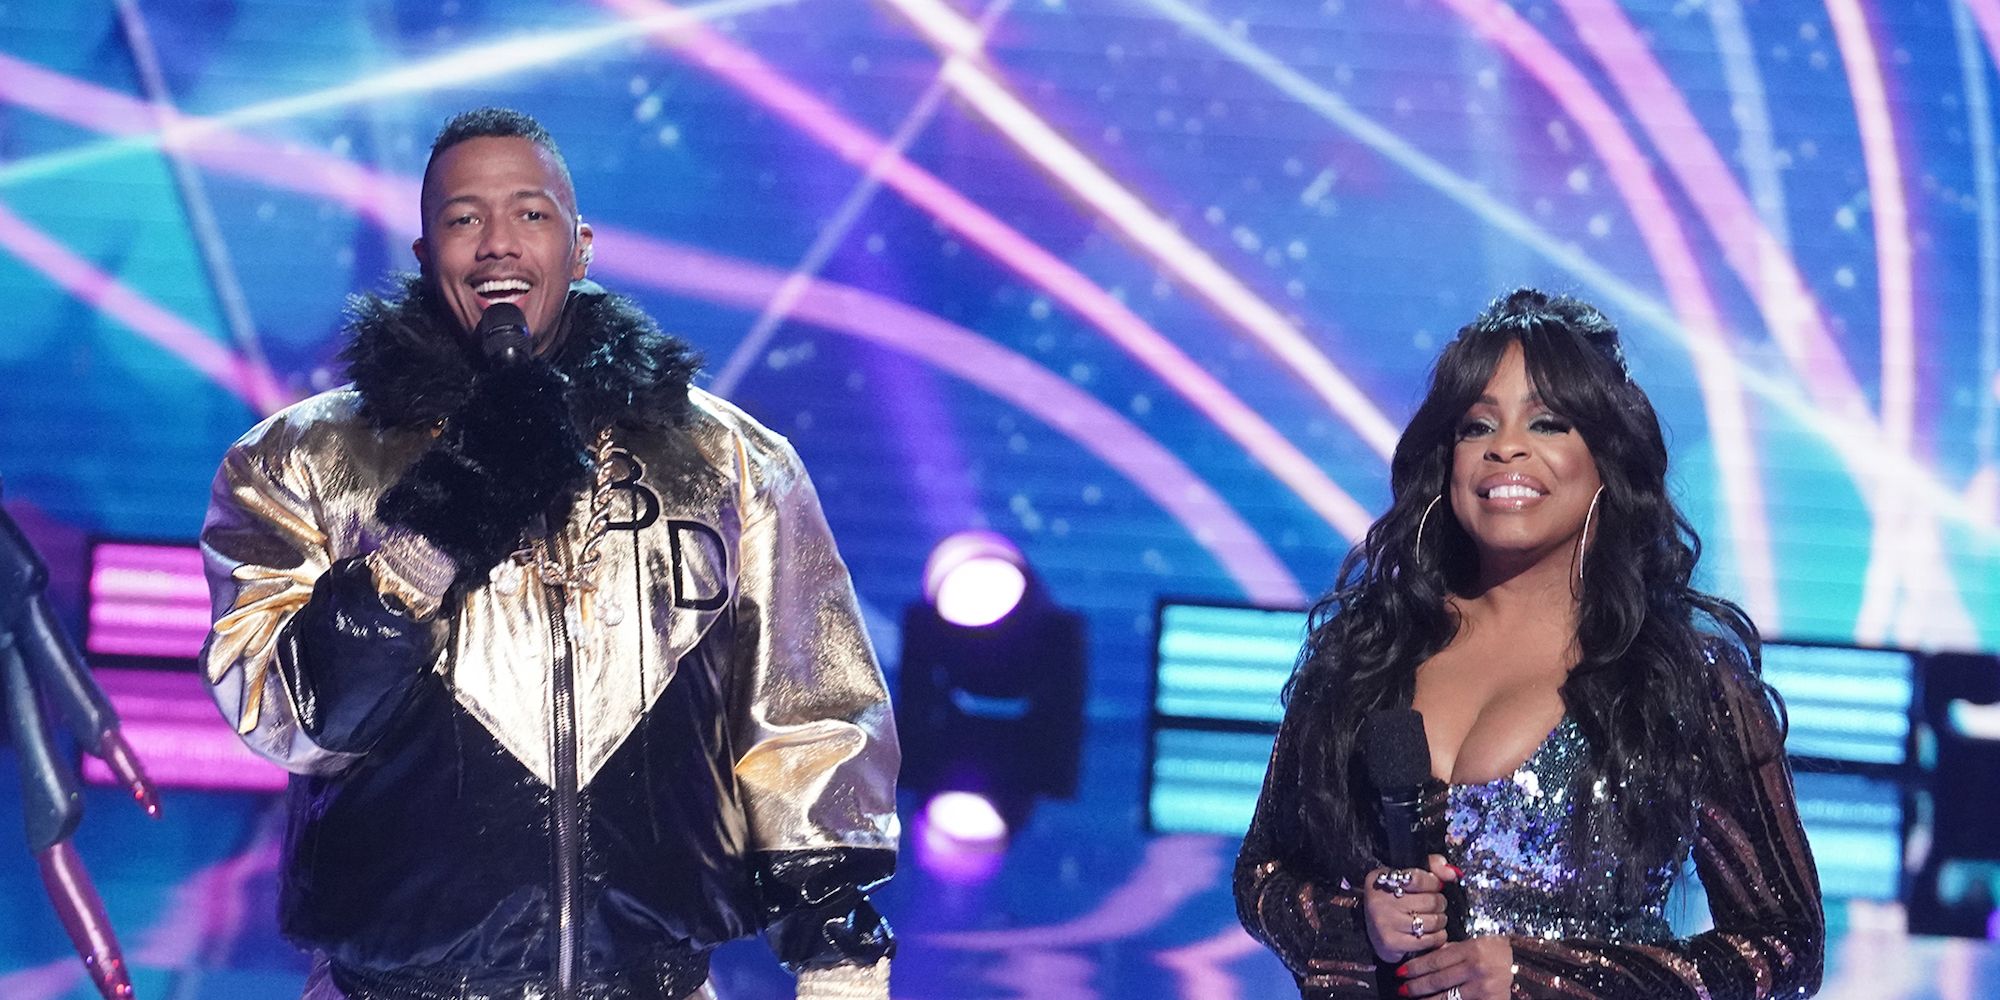 The Masked Singer Nick Cannon and Niecy Nash Bulldog reveal